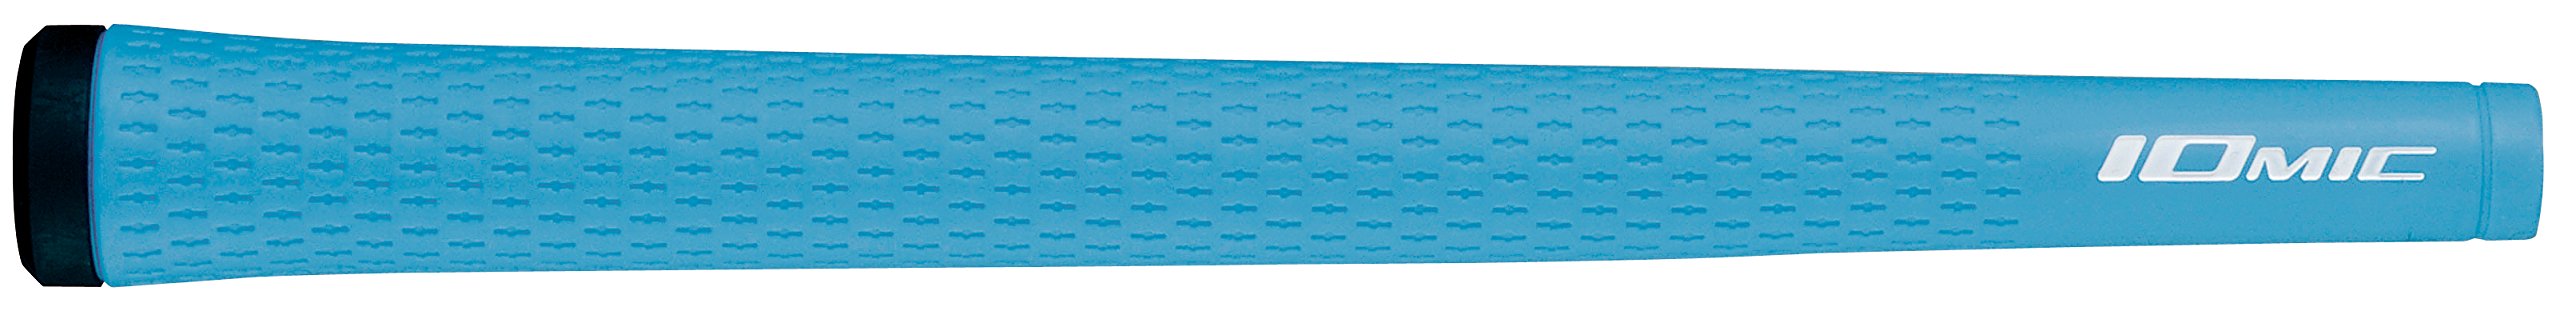 IOMIC Golf Grip Sticky MID Recycle Grip Series Sky Blue/Black M60 Made in Japan_1